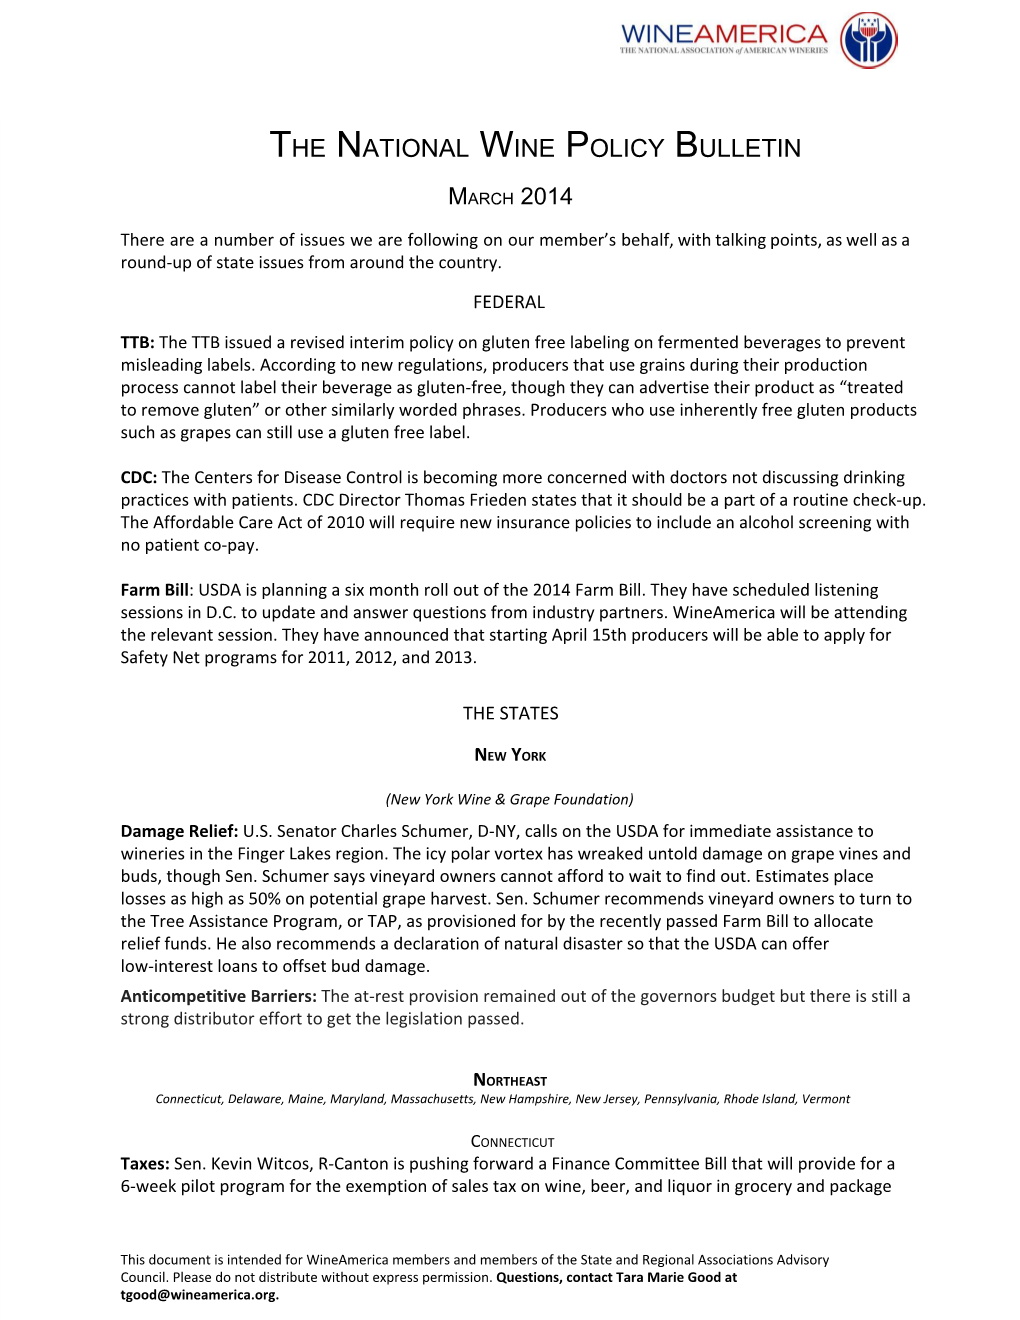 The National Wine Policy Bulletin